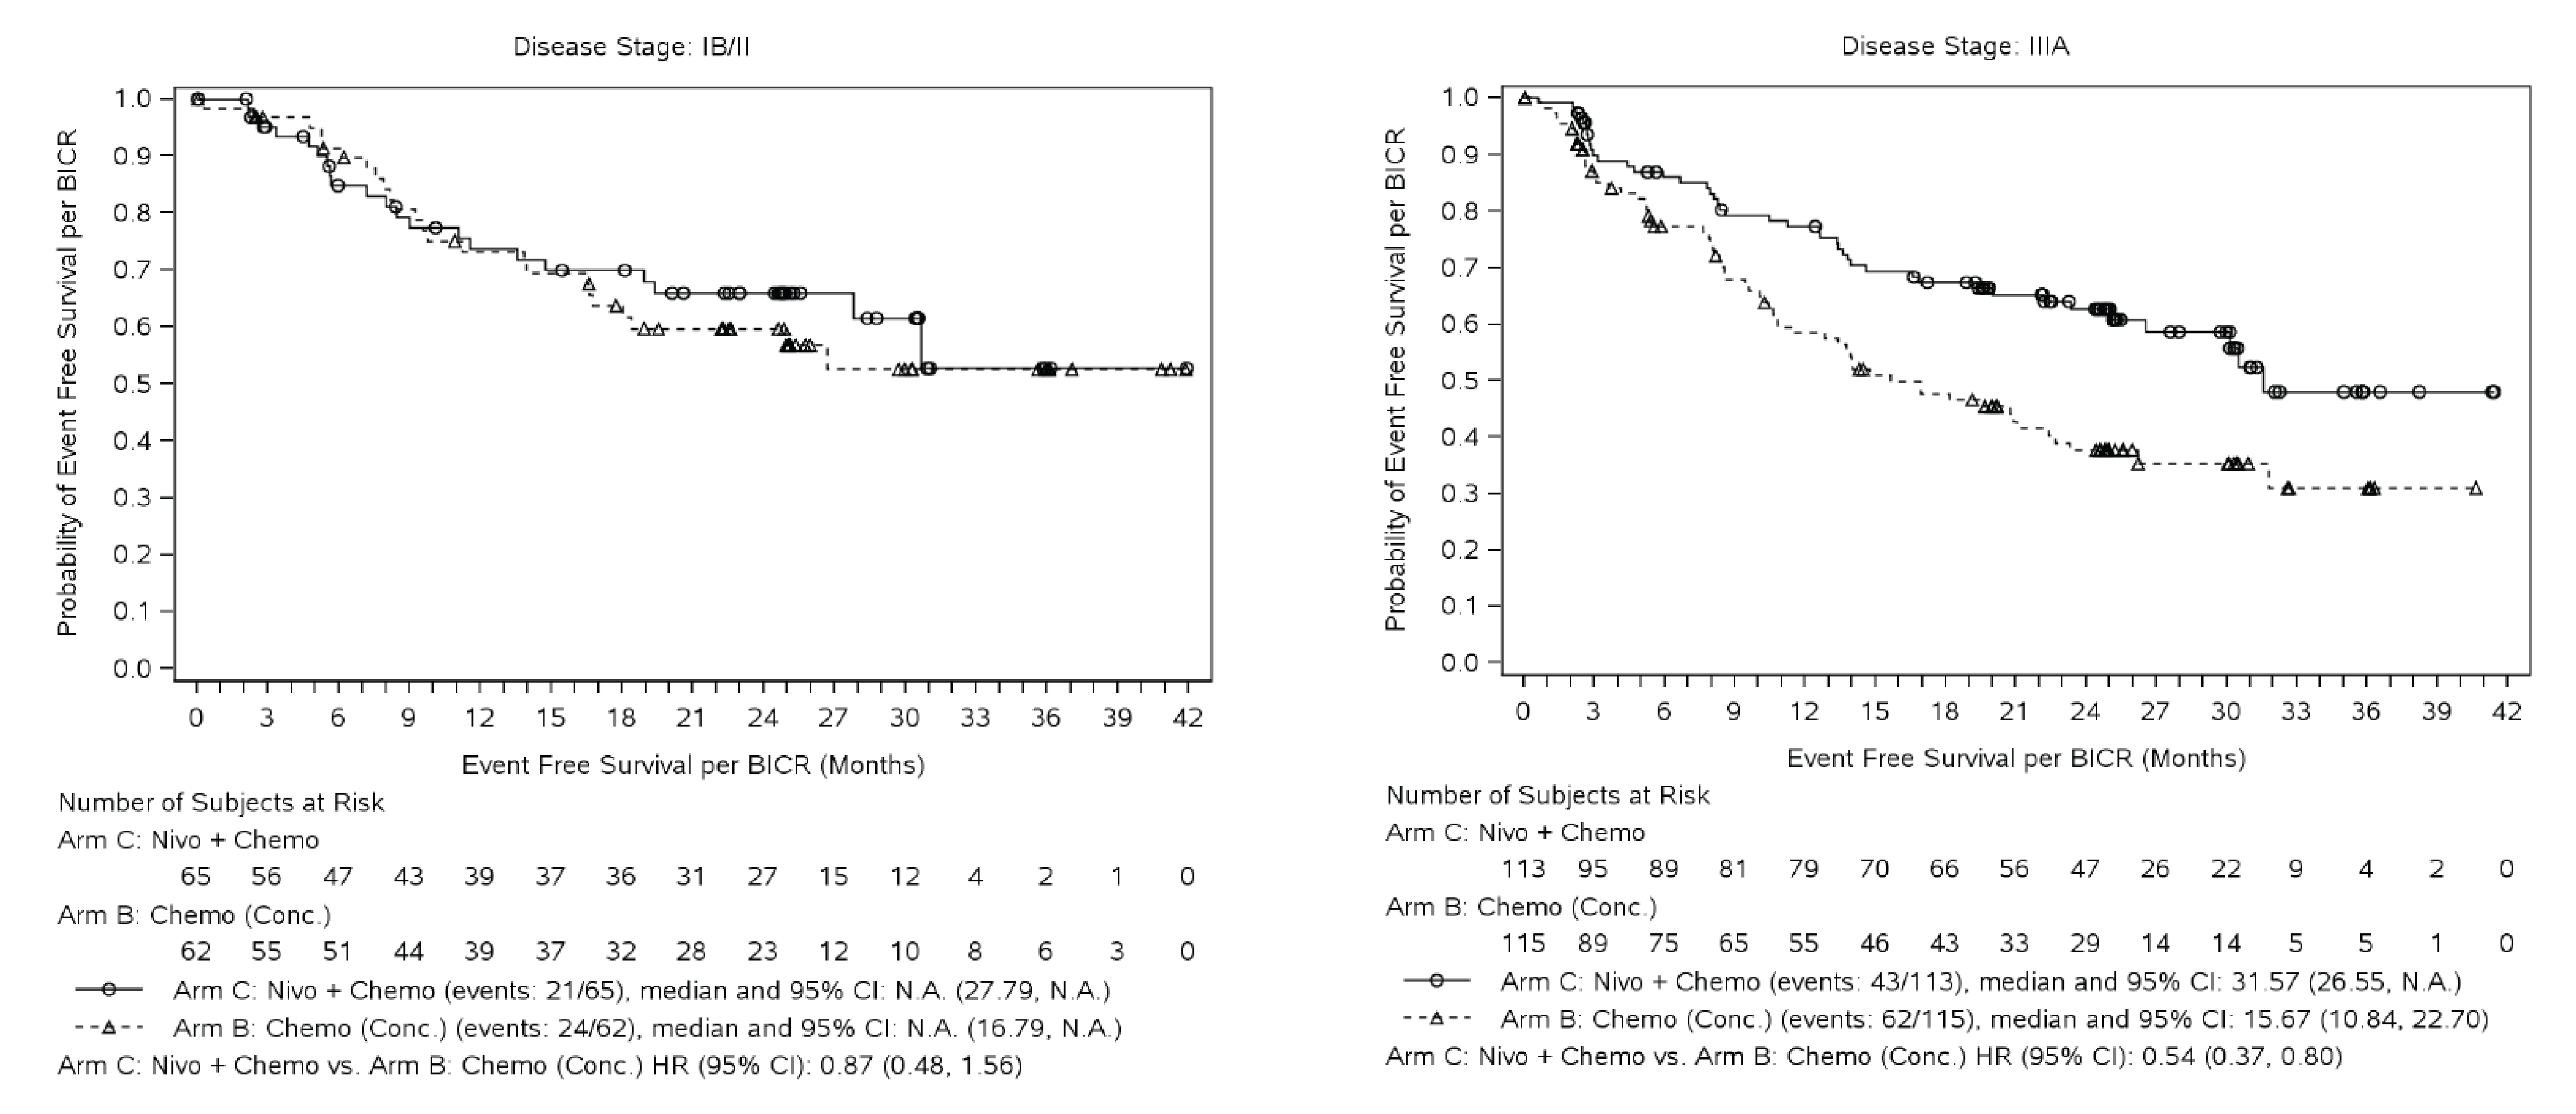 These graphs outline event-free survival for those who are stage IB/II (figure on the left) versus those who are stage IIIA (figure on the right) as taken from the CheckMate 816 trial.